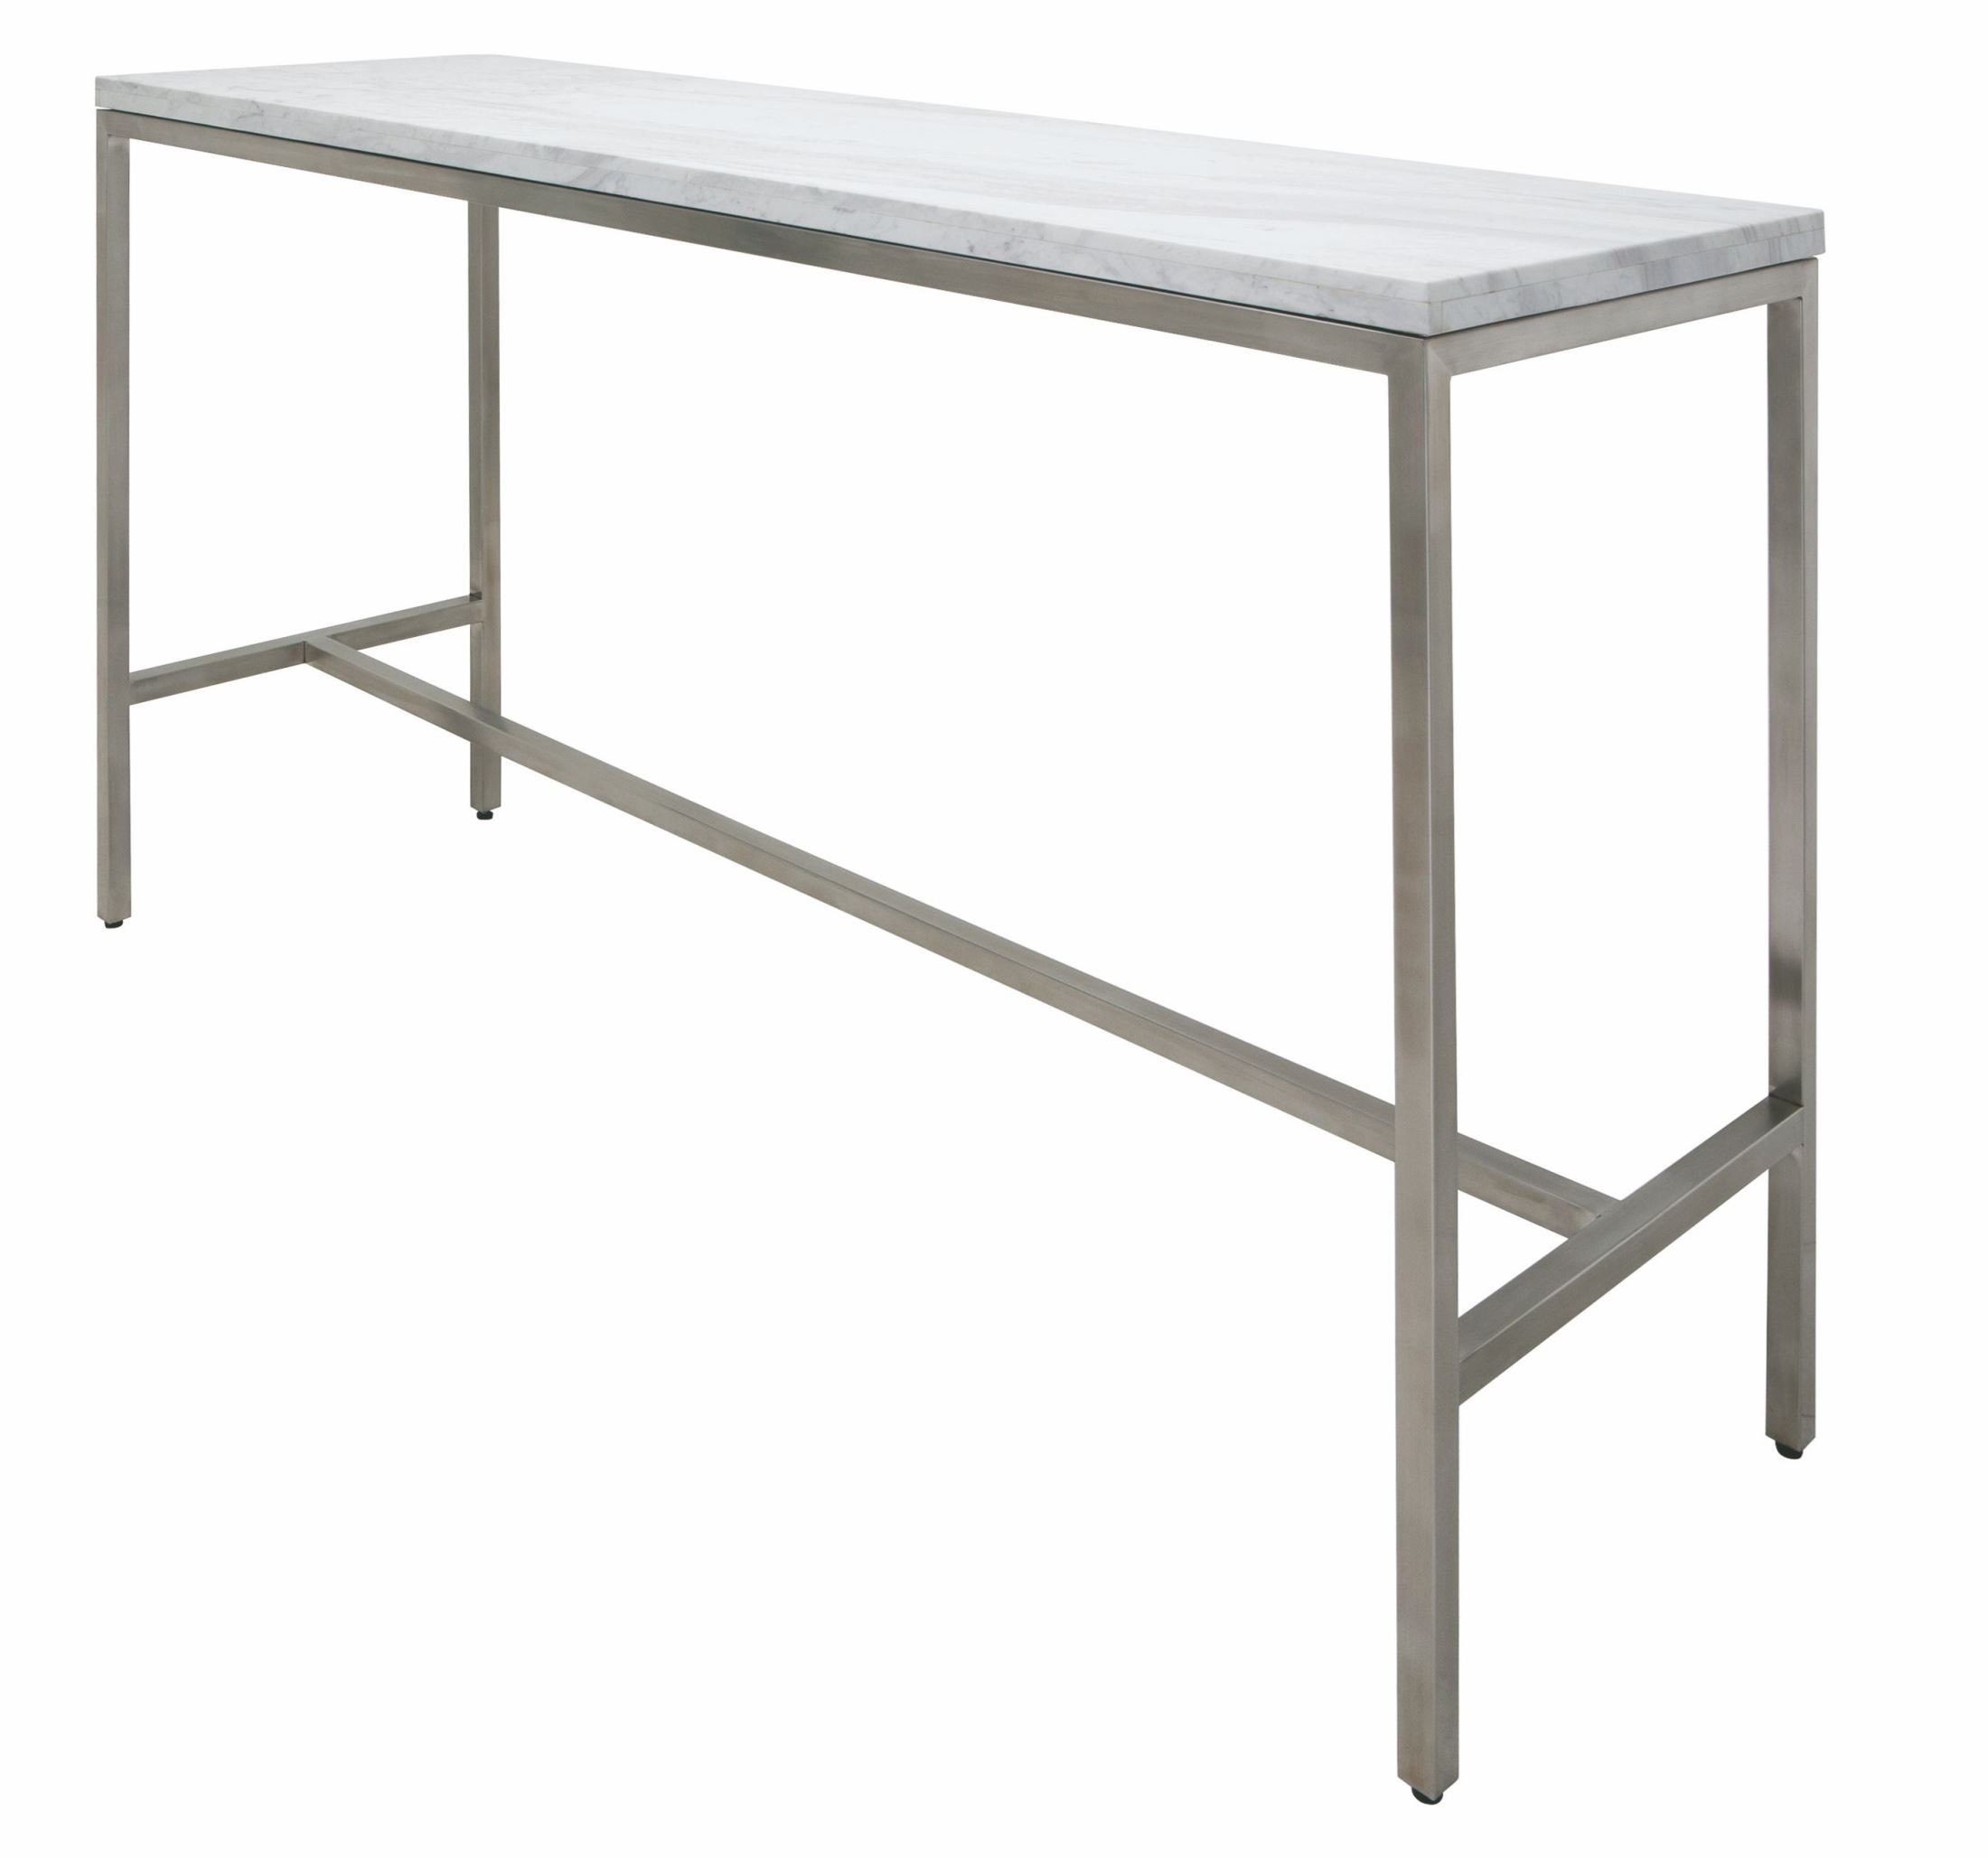 Metal Bar Height Table | peacecommission.kdsg.gov.ng